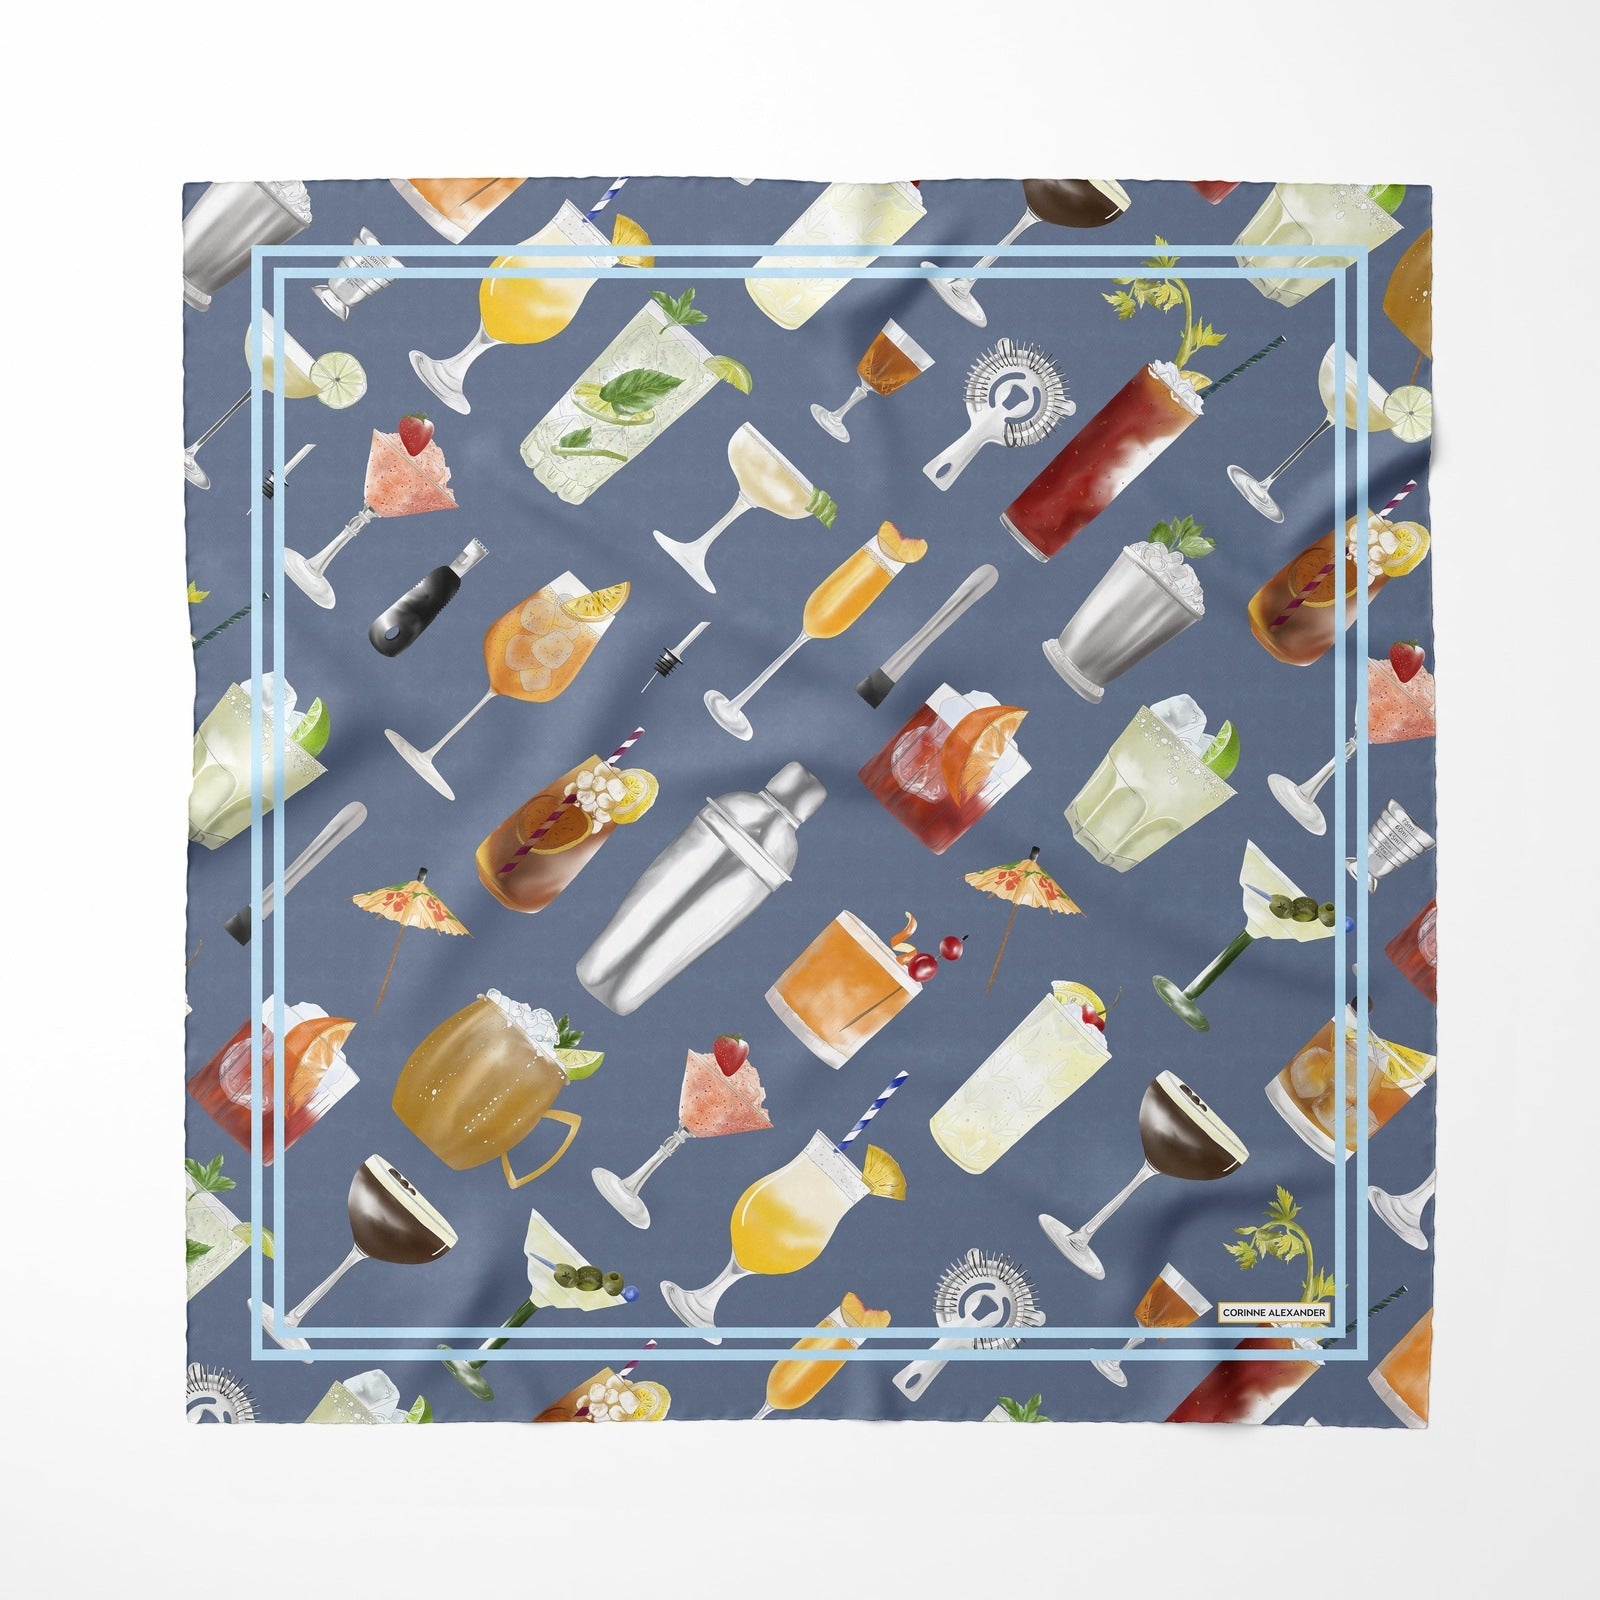 Mixologist Silk Scarf Featuring a Cocktail Print